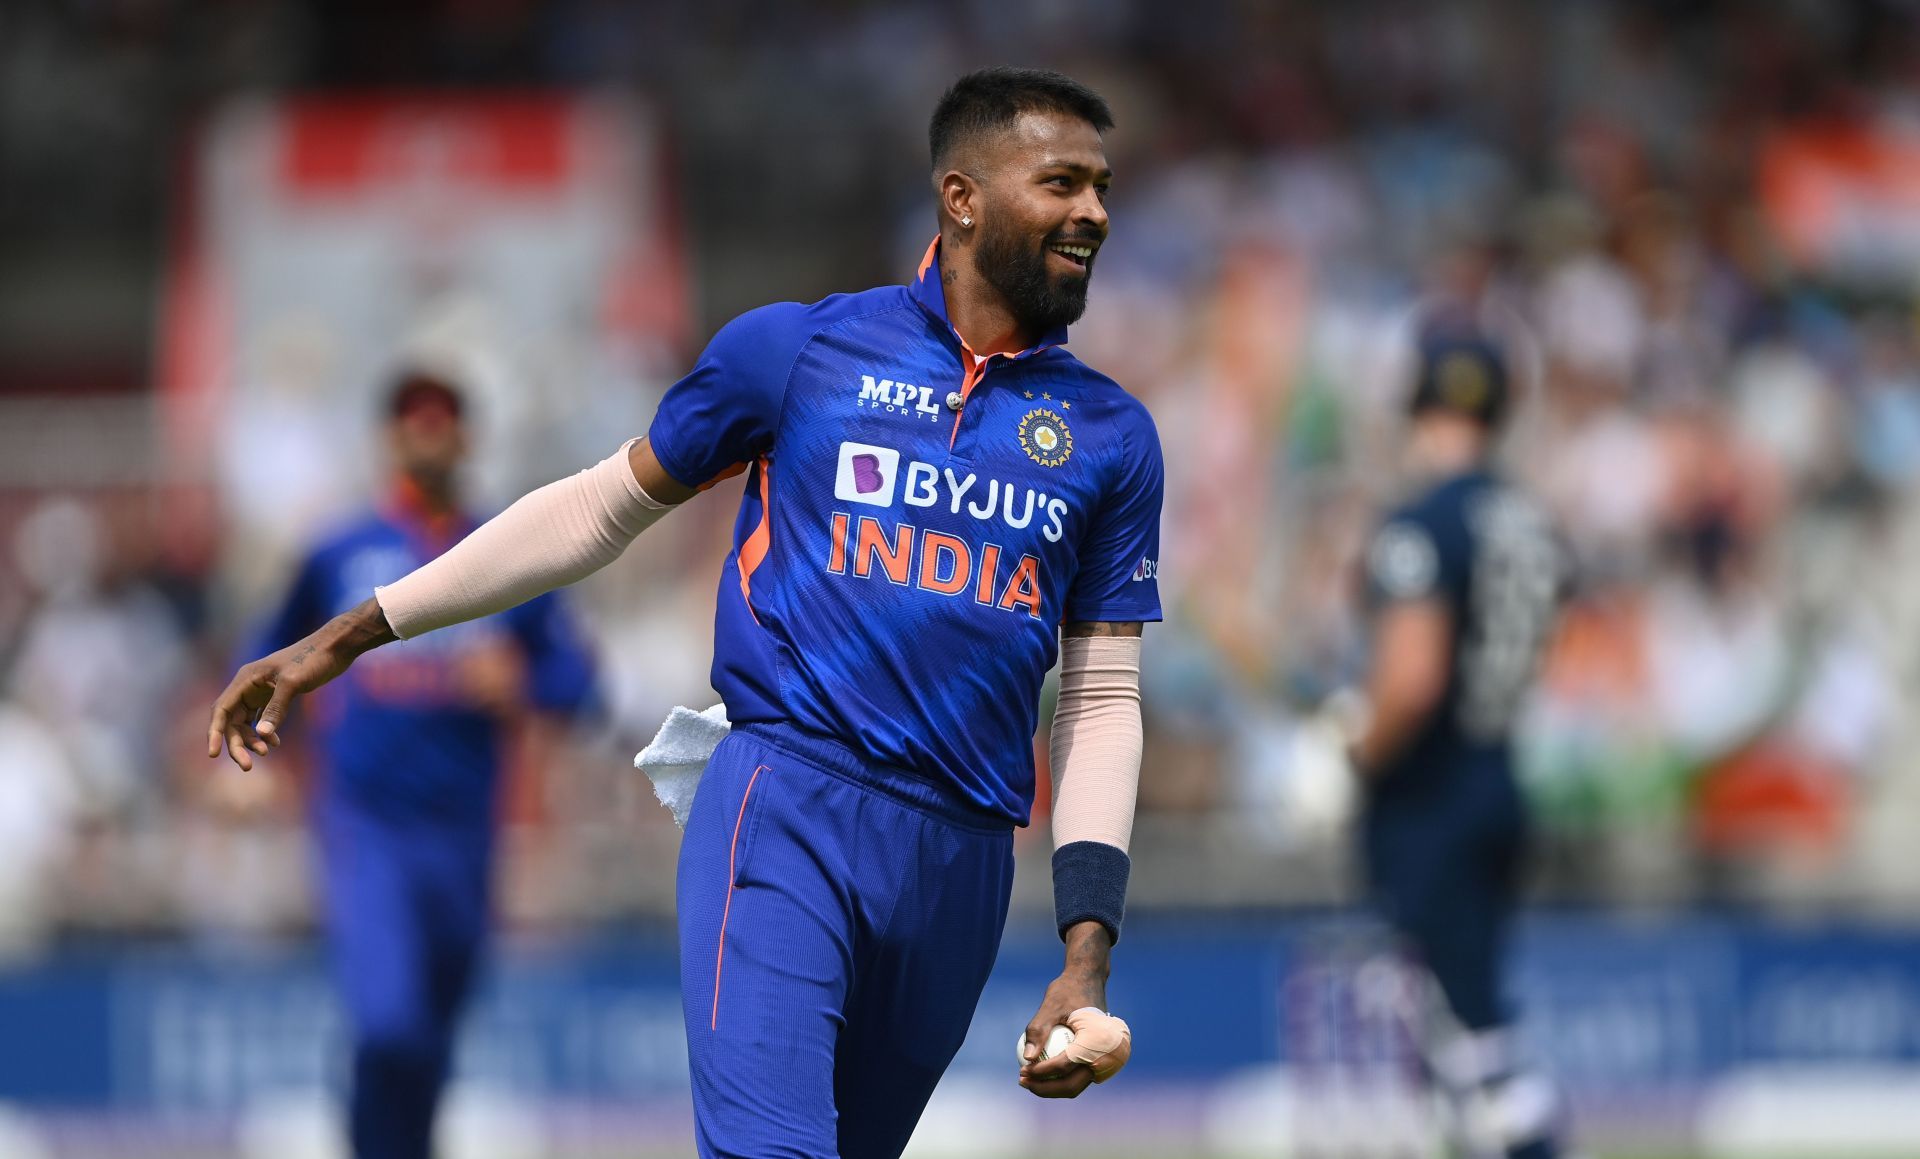 Hardik Pandya was adjudged as the Player of the Series in the ODI rubber.